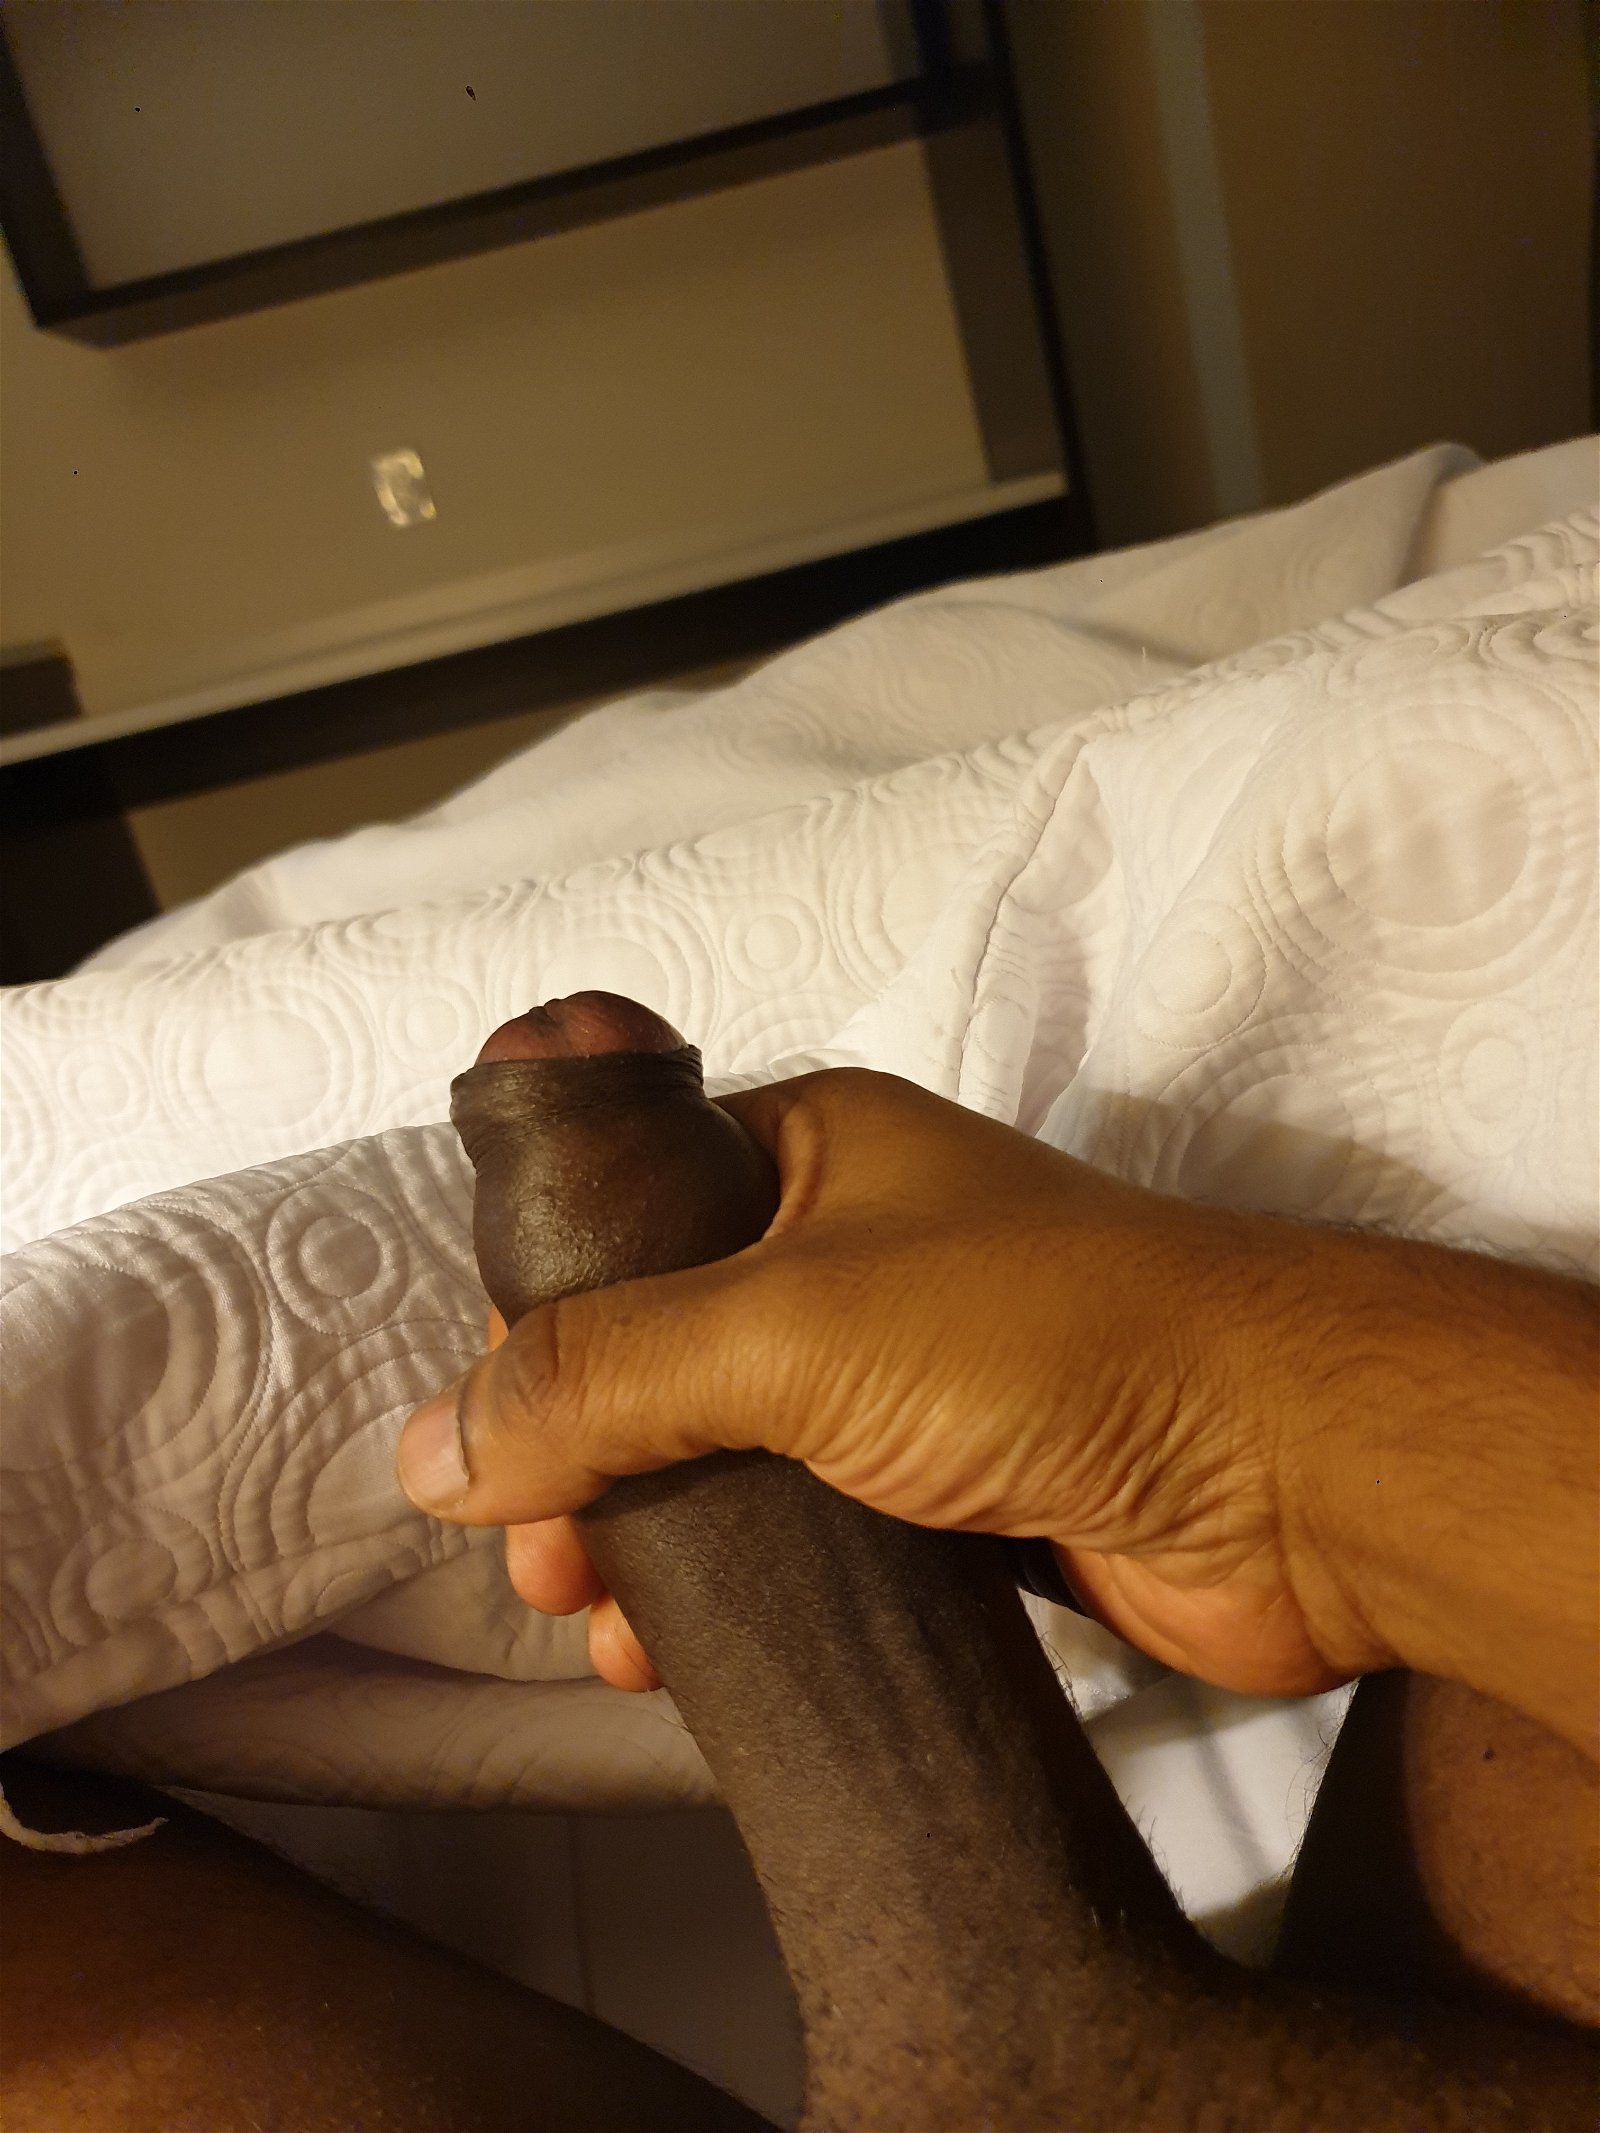 Photo by bangaloreyes with the username @bangaloreyes,  October 1, 2019 at 10:09 AM. The post is about the topic Amateurs and the text says '#dick #morningwood #amateur'